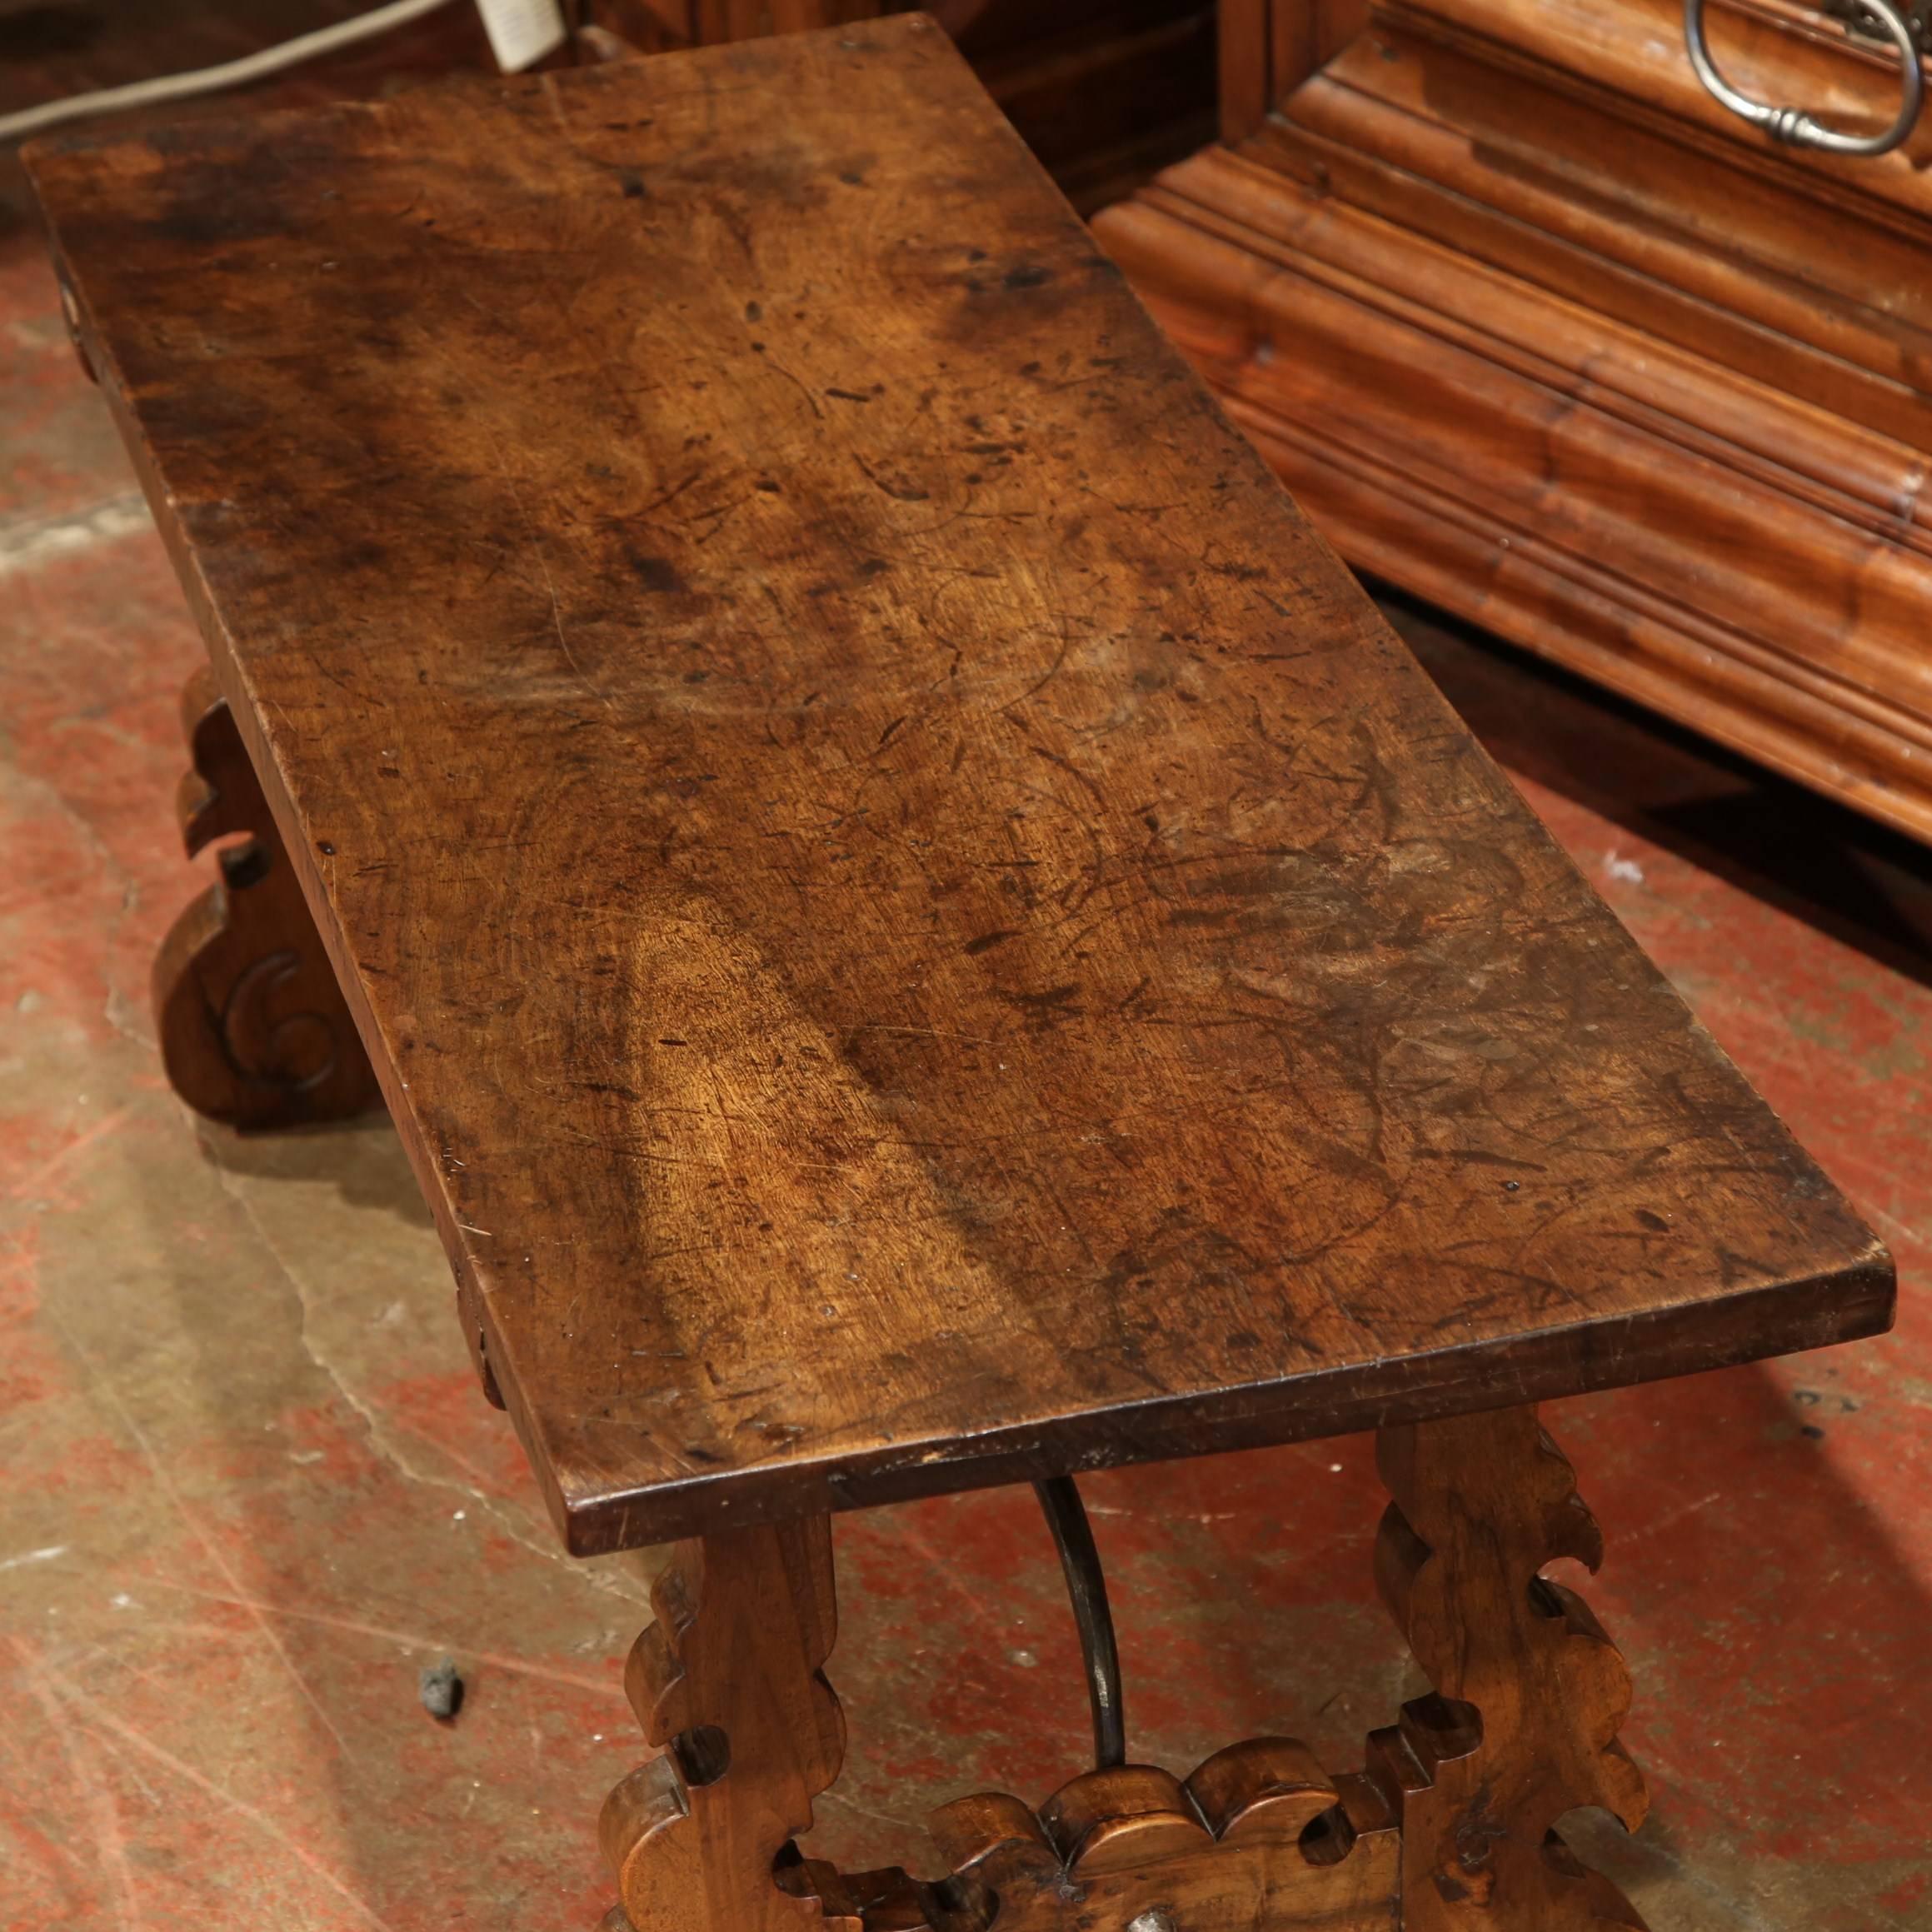 Add extra surfaces to your family room with this beautiful, small coffee table from Spain. Carved, circa 1840, the fruit wood table features two carved legs with black forged iron stretchers. The top is made one single wooden plank. The table is in